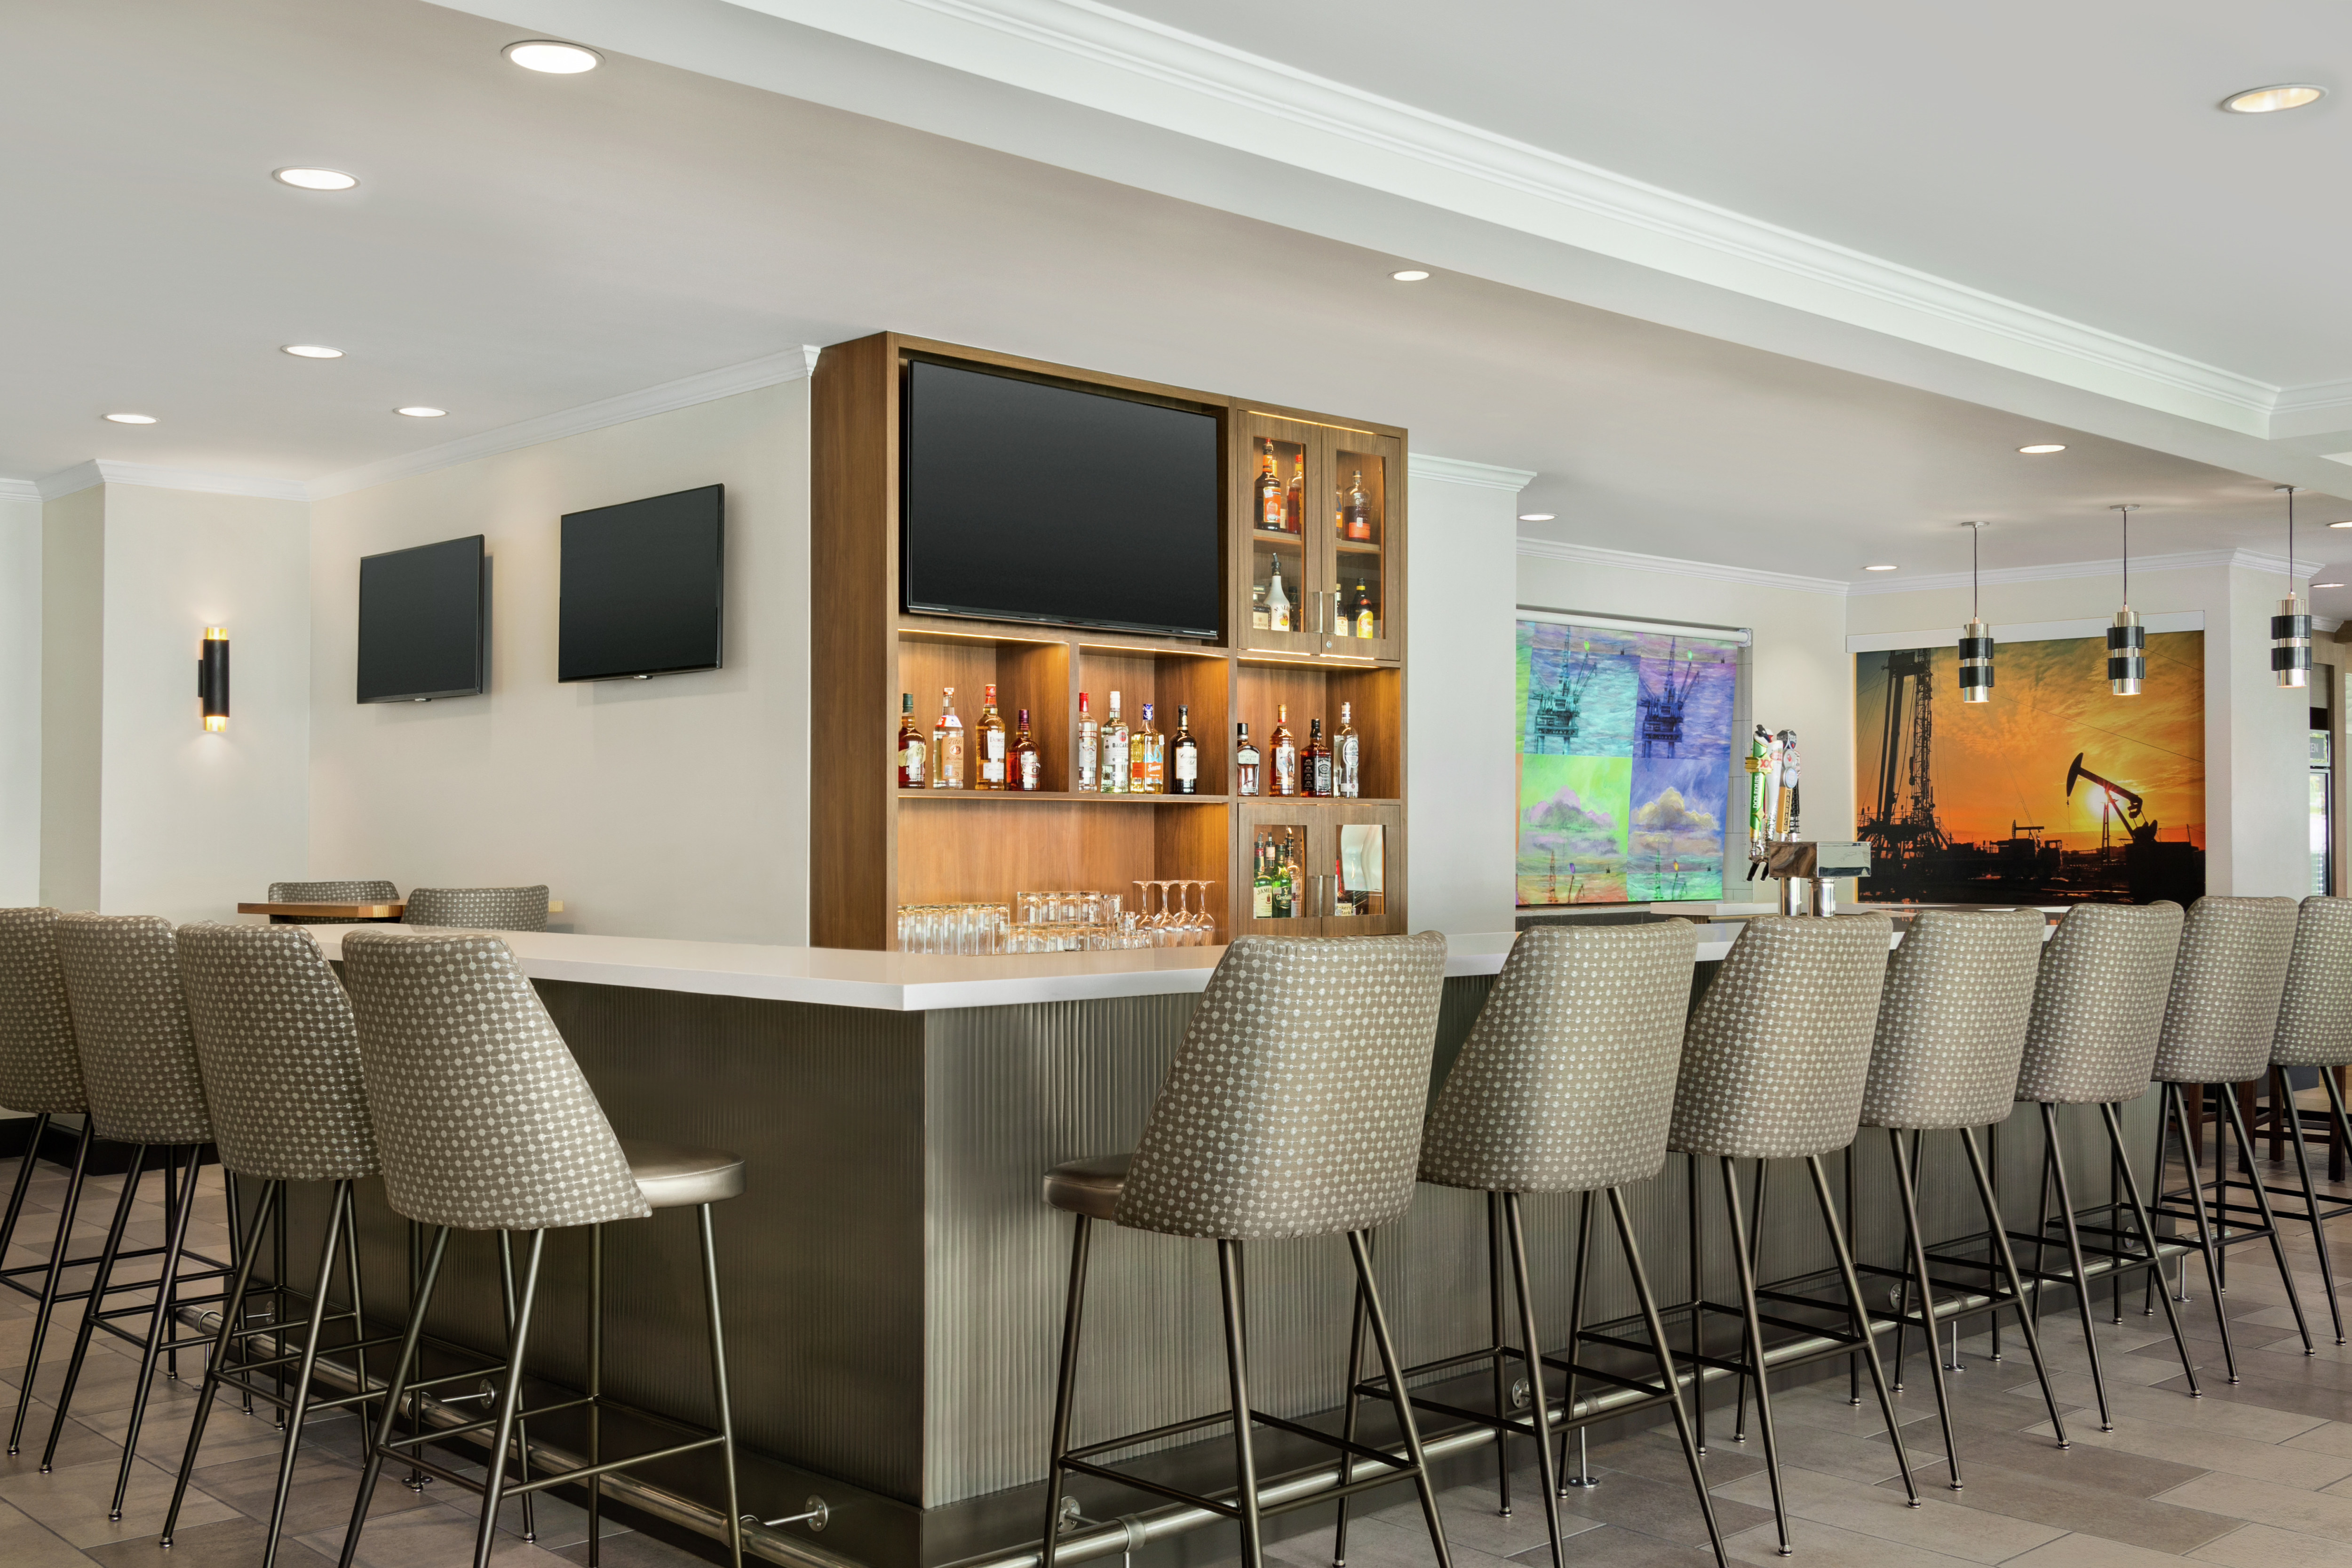 Spacious hotel bar area featuring ample seating, TVs, and local artwork.